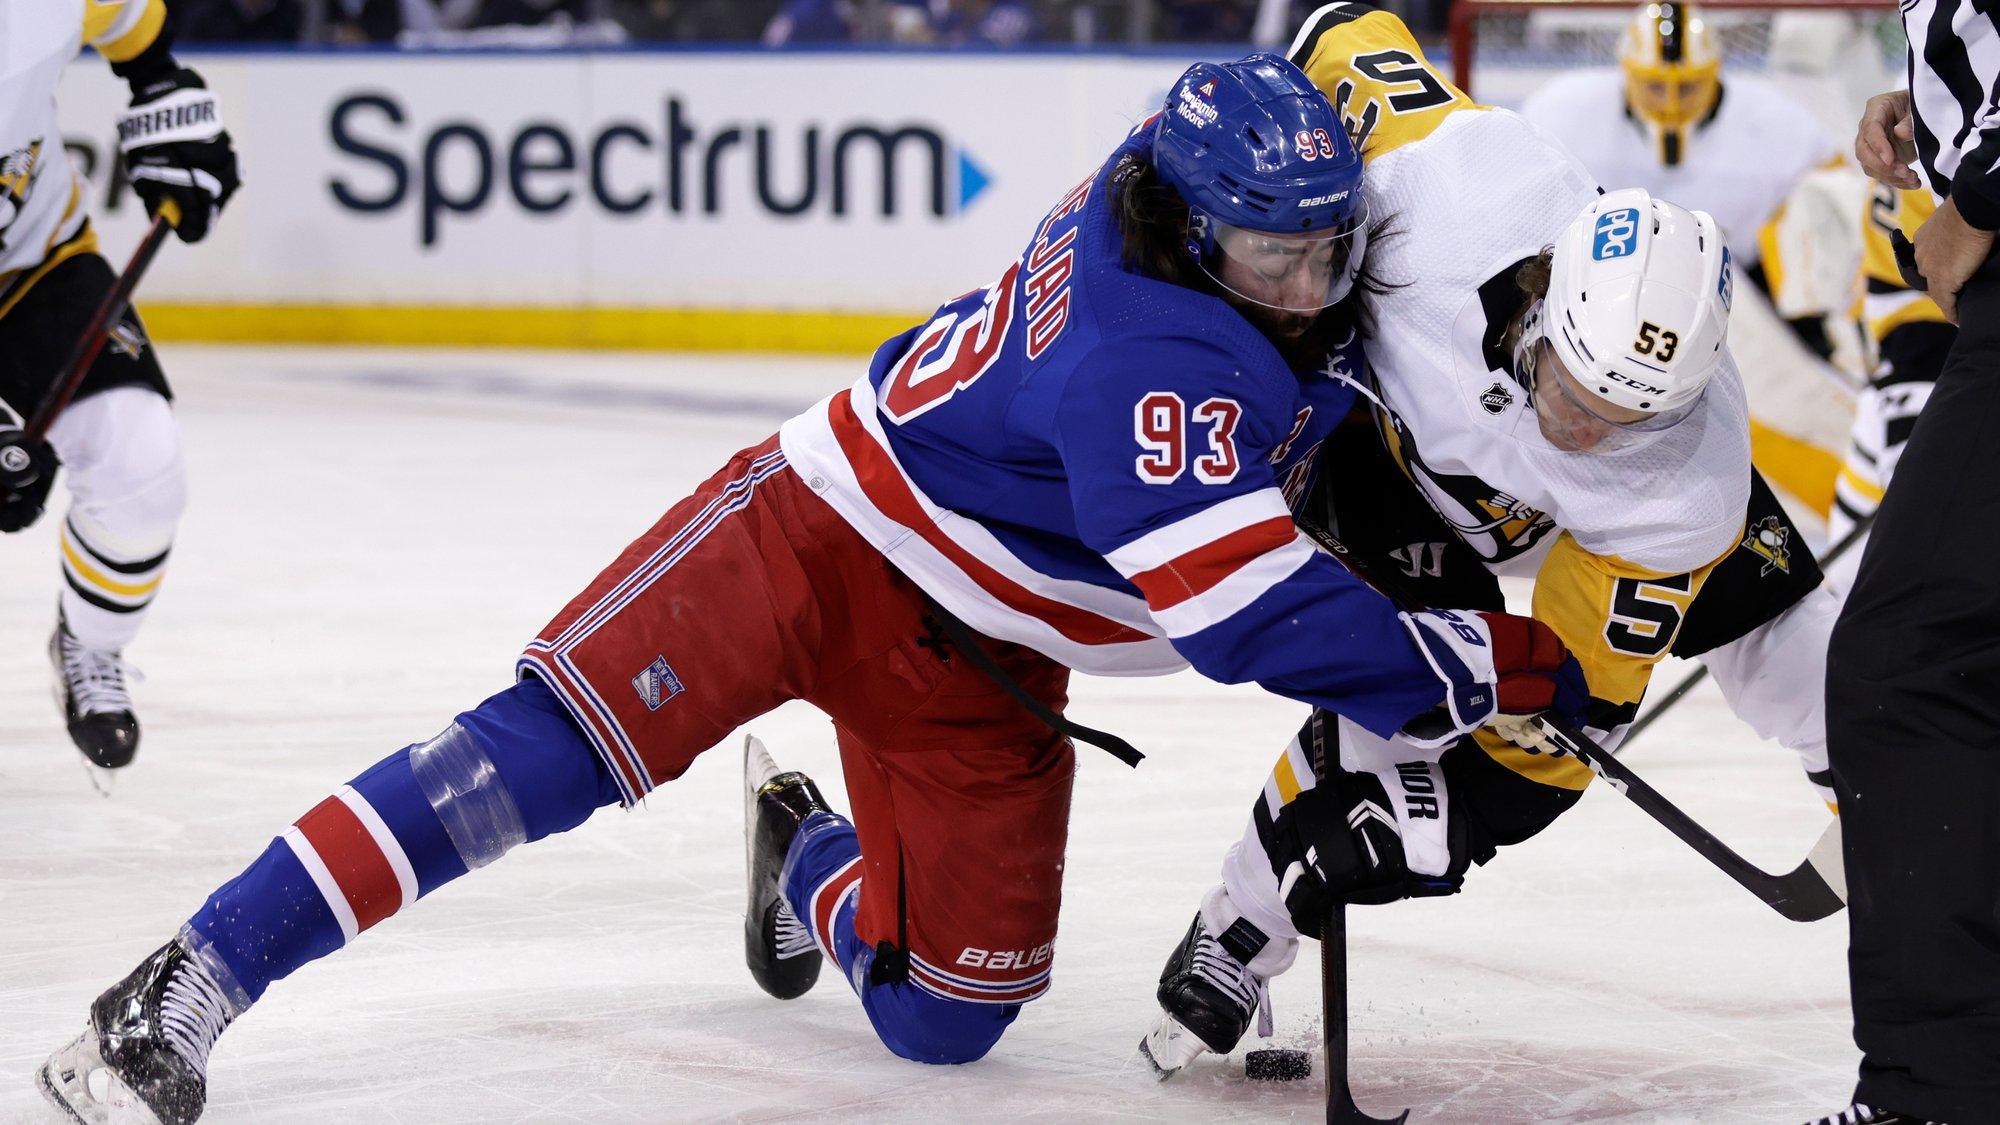 Penguins vs. Rangers Game 5 Odds and Predictions: Penguins to Finish Off Rangers and Win the Series